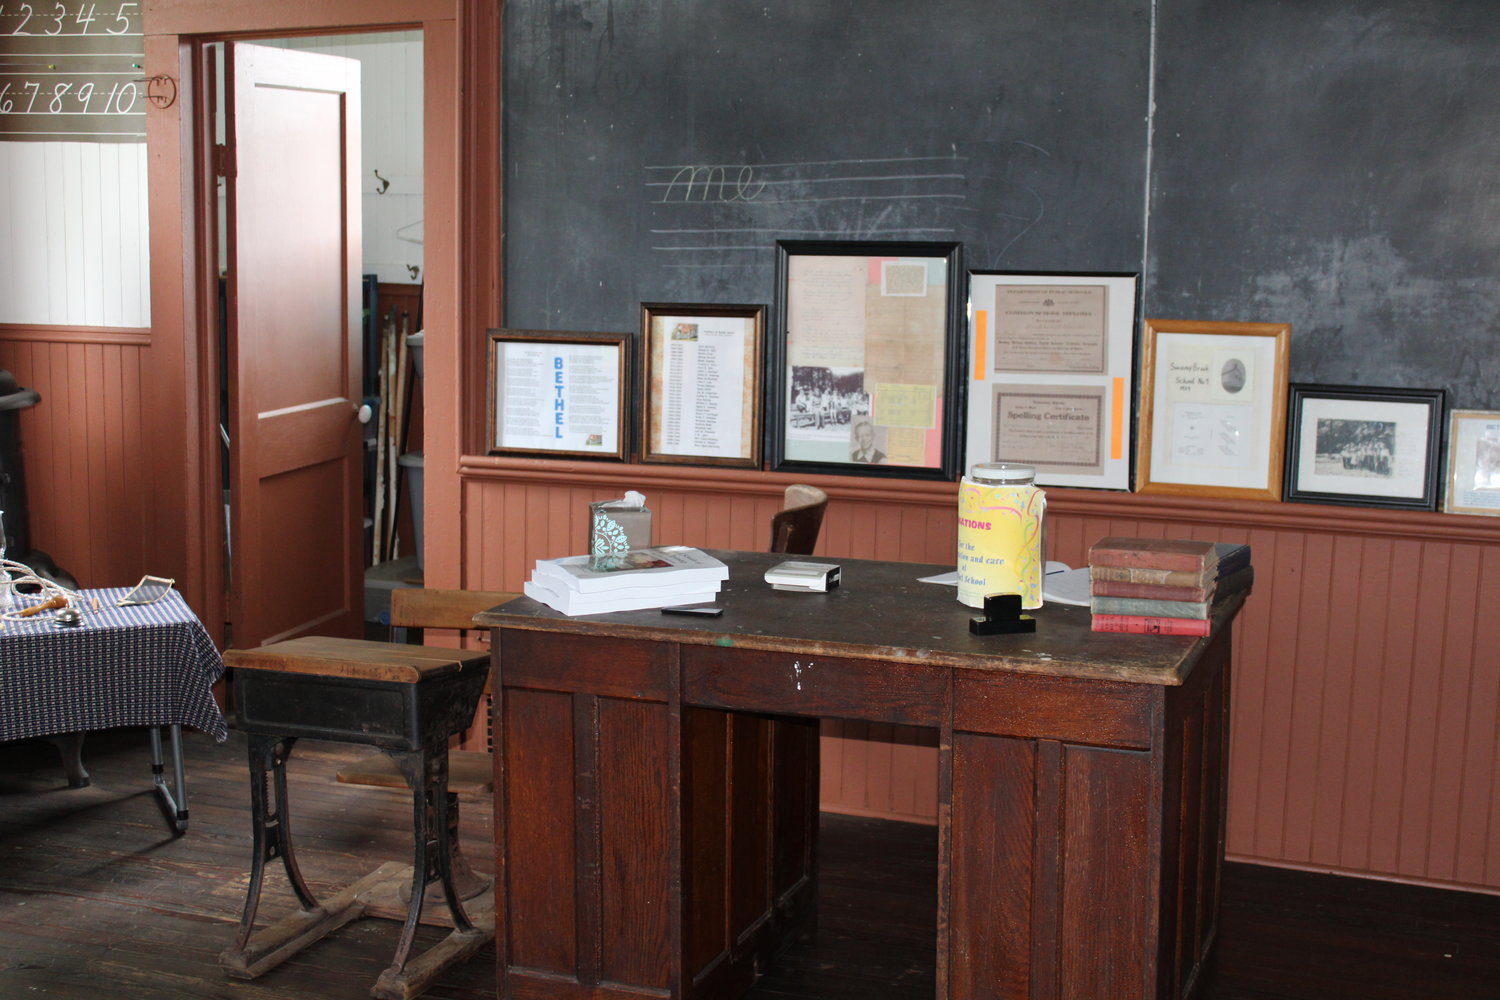 The front of the tiny classroom looks like it hasn't changed in decades.